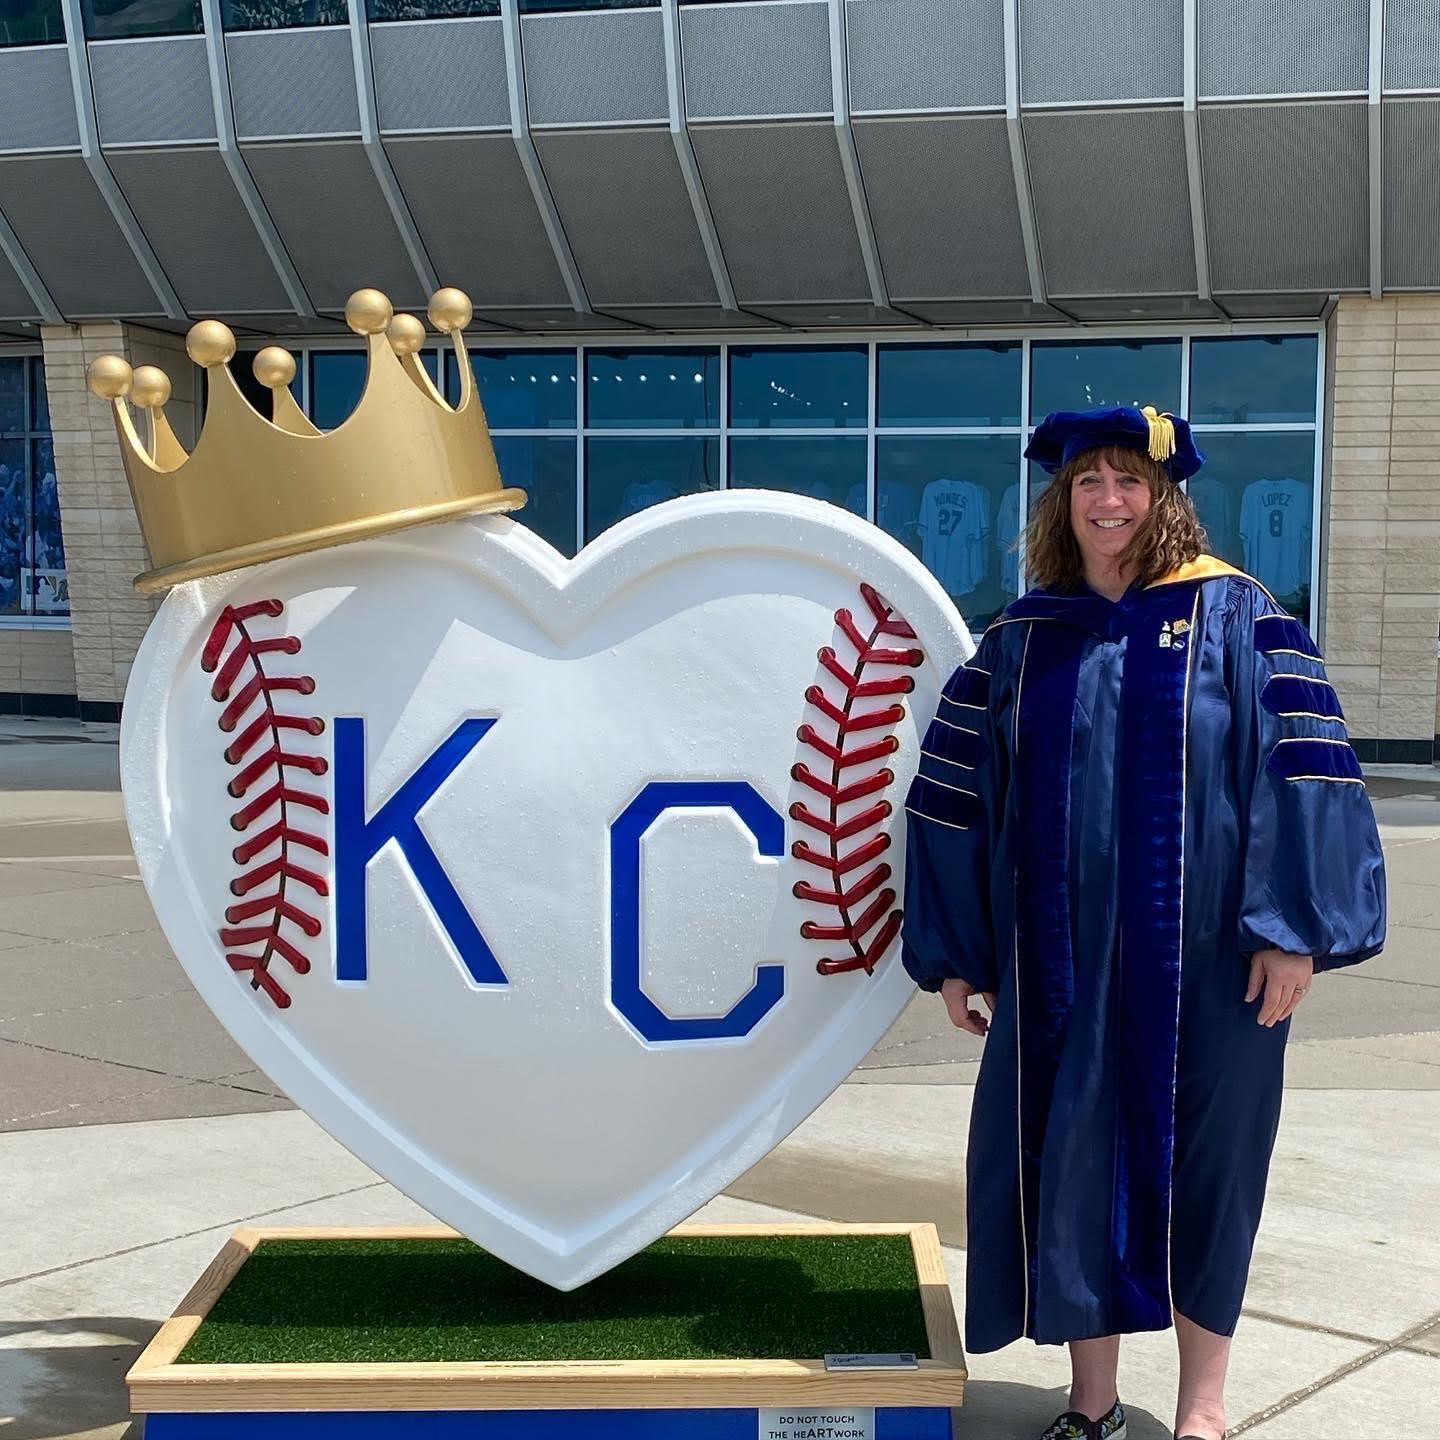 Tiffani Riggers-Piehl standing in doctoral regalia next to a KC heart painted to look like a baseball